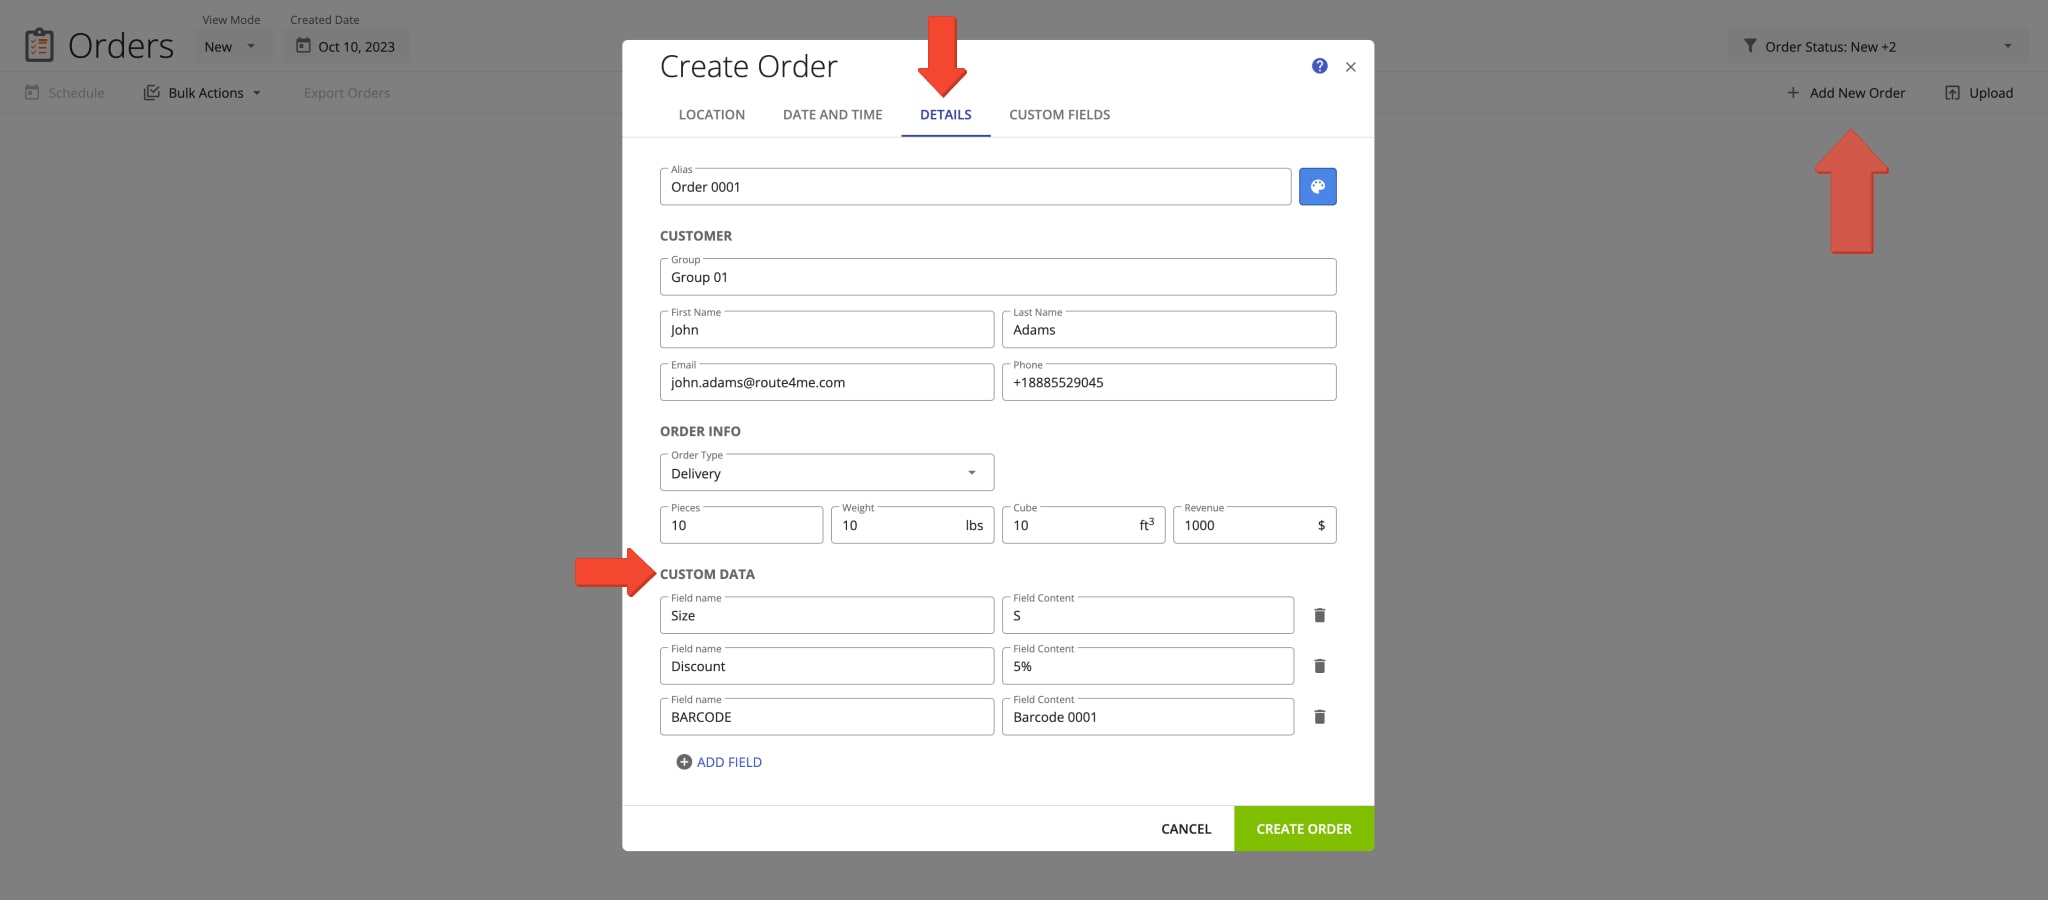 Create new orders or manage scheduled orders and add Custom Data to orders.